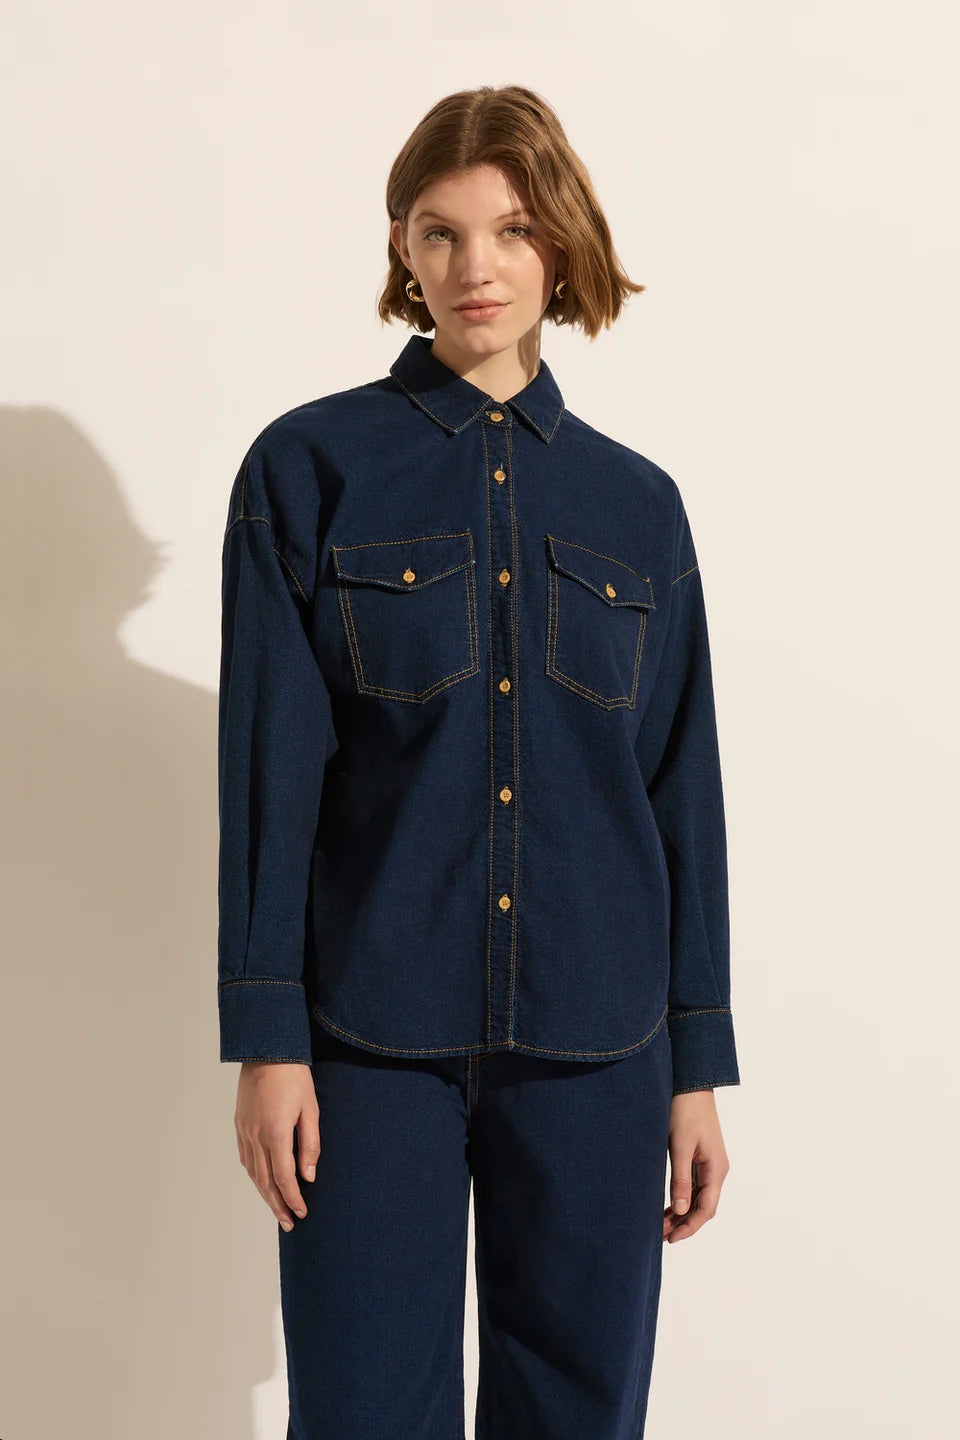 Amelia Long Sleeve Shirt in Vision